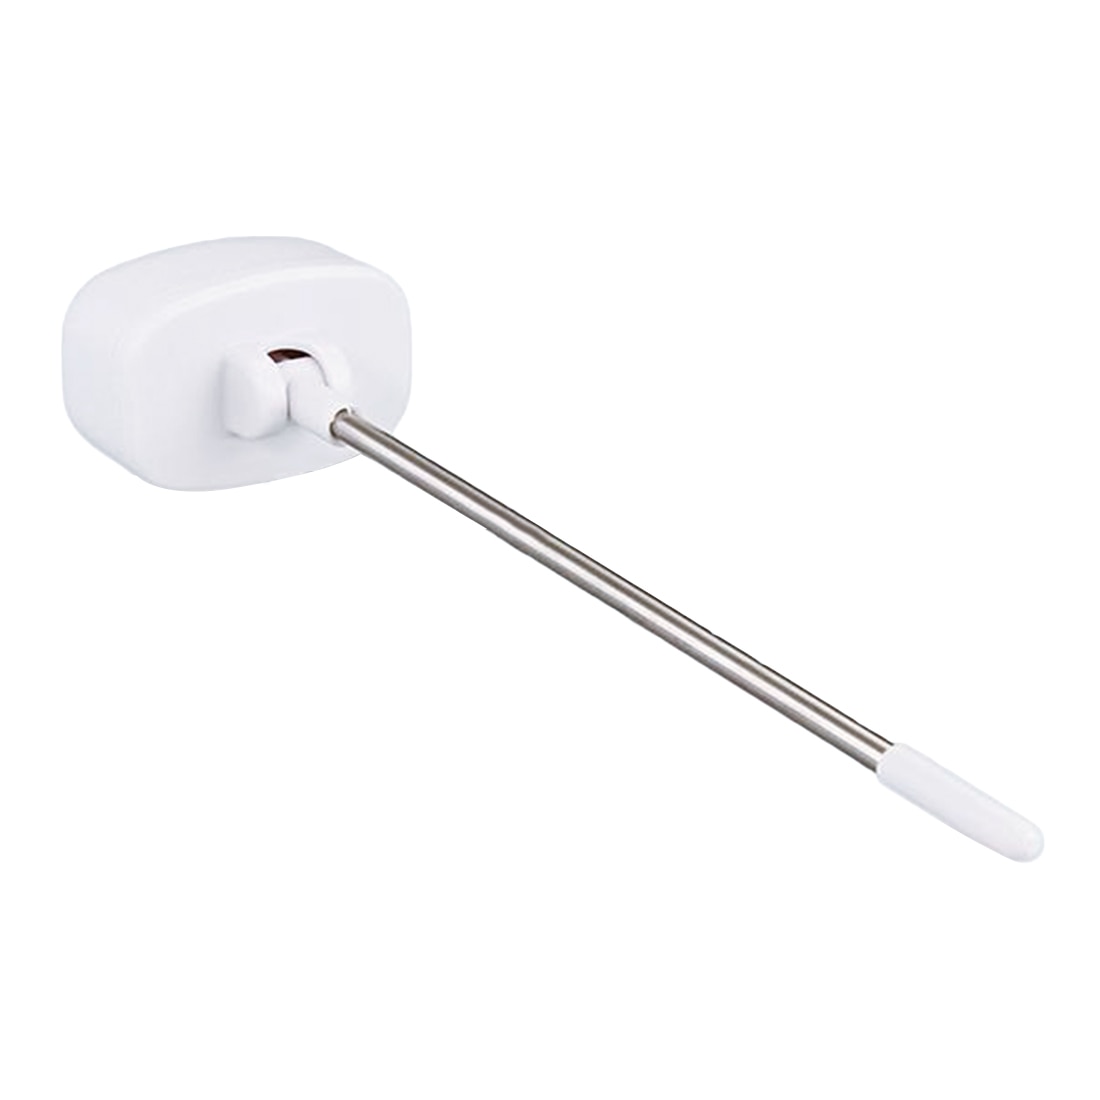 Digital Cooking Thermometer Steel Probe